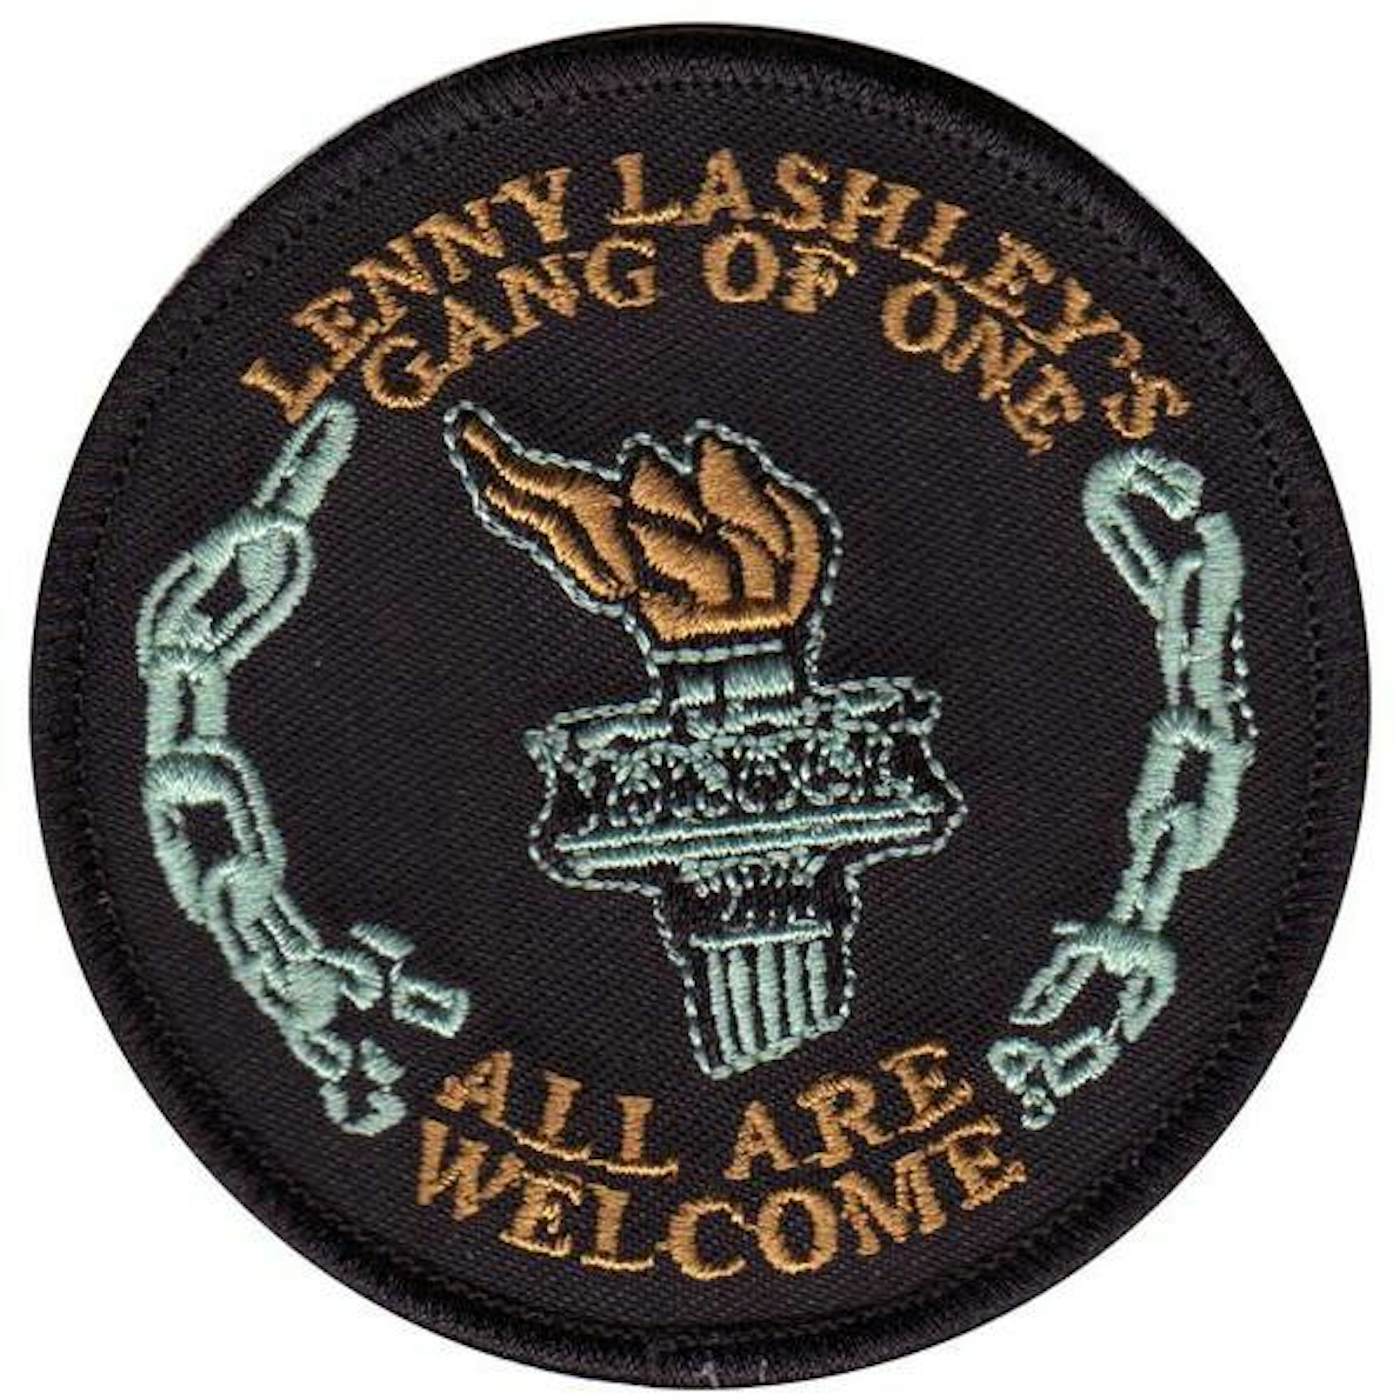 Lenny Lashley's Gang of One Lenny Lashley Gang of One - All Are Welcome - Circle Torch - Patch - Embroidered - 3"